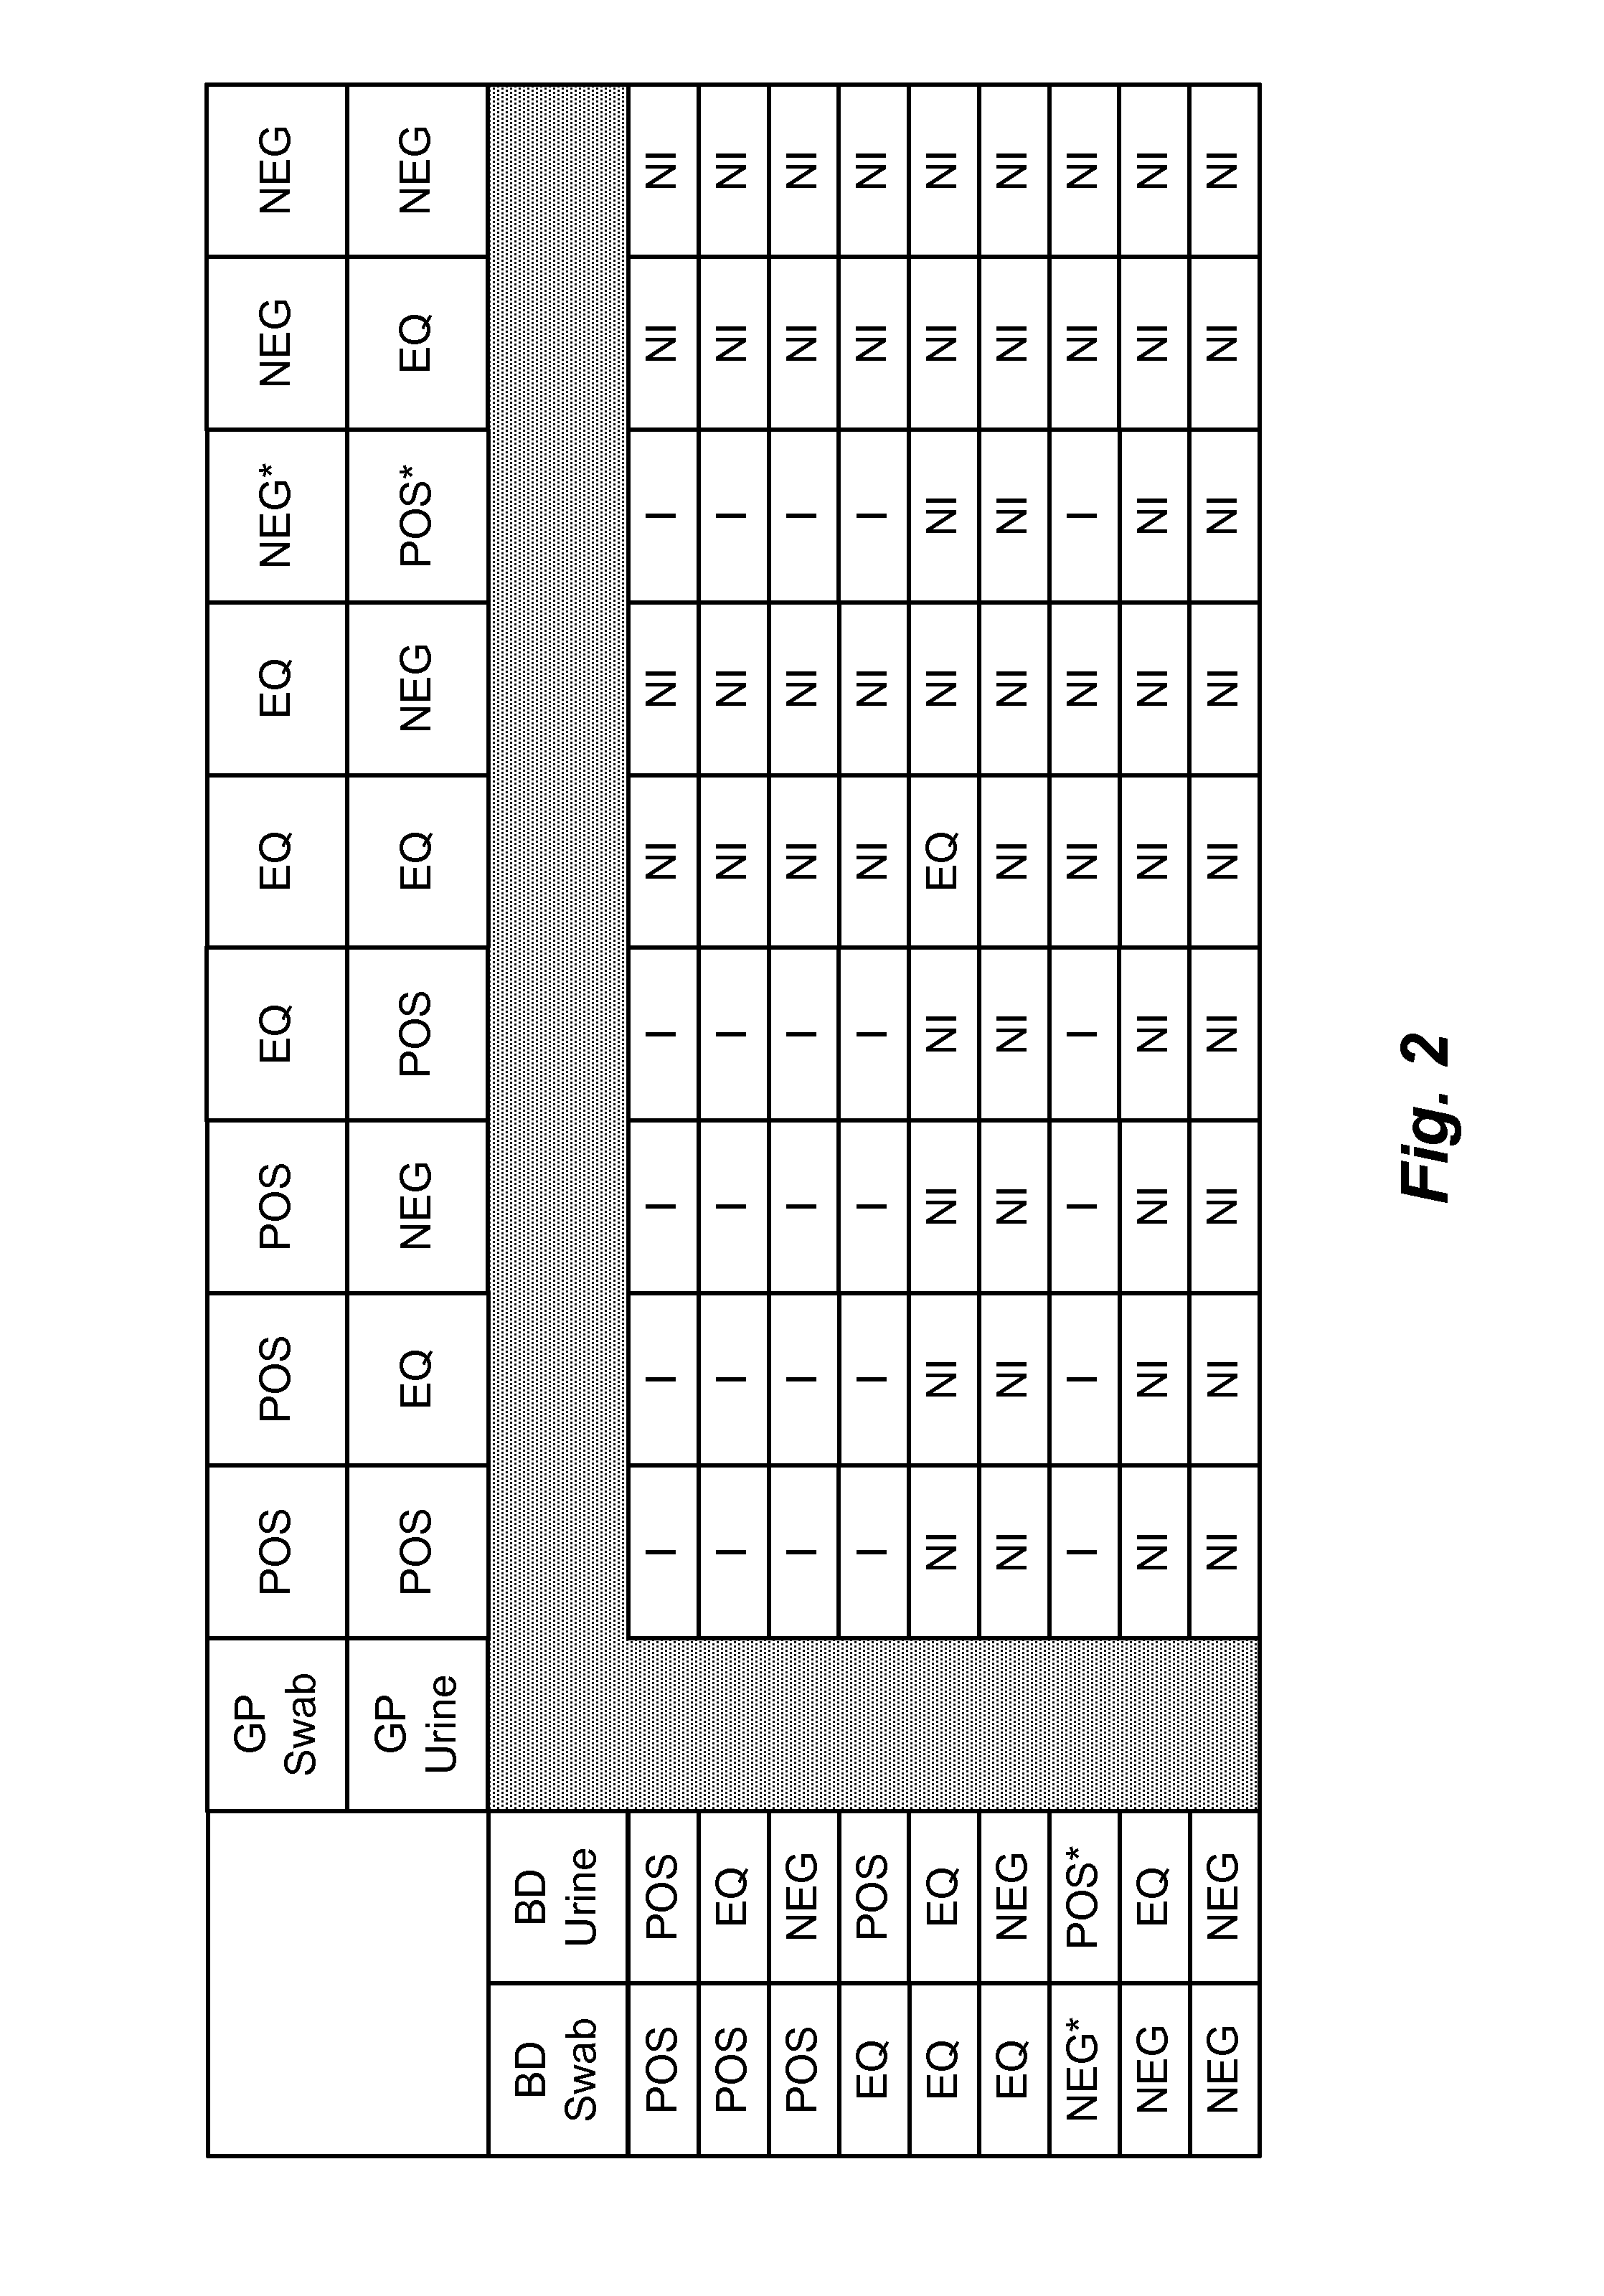 Methods of detecting chlamydia and gonorrhea and of screening for infection/inflammation based on genomic copy number